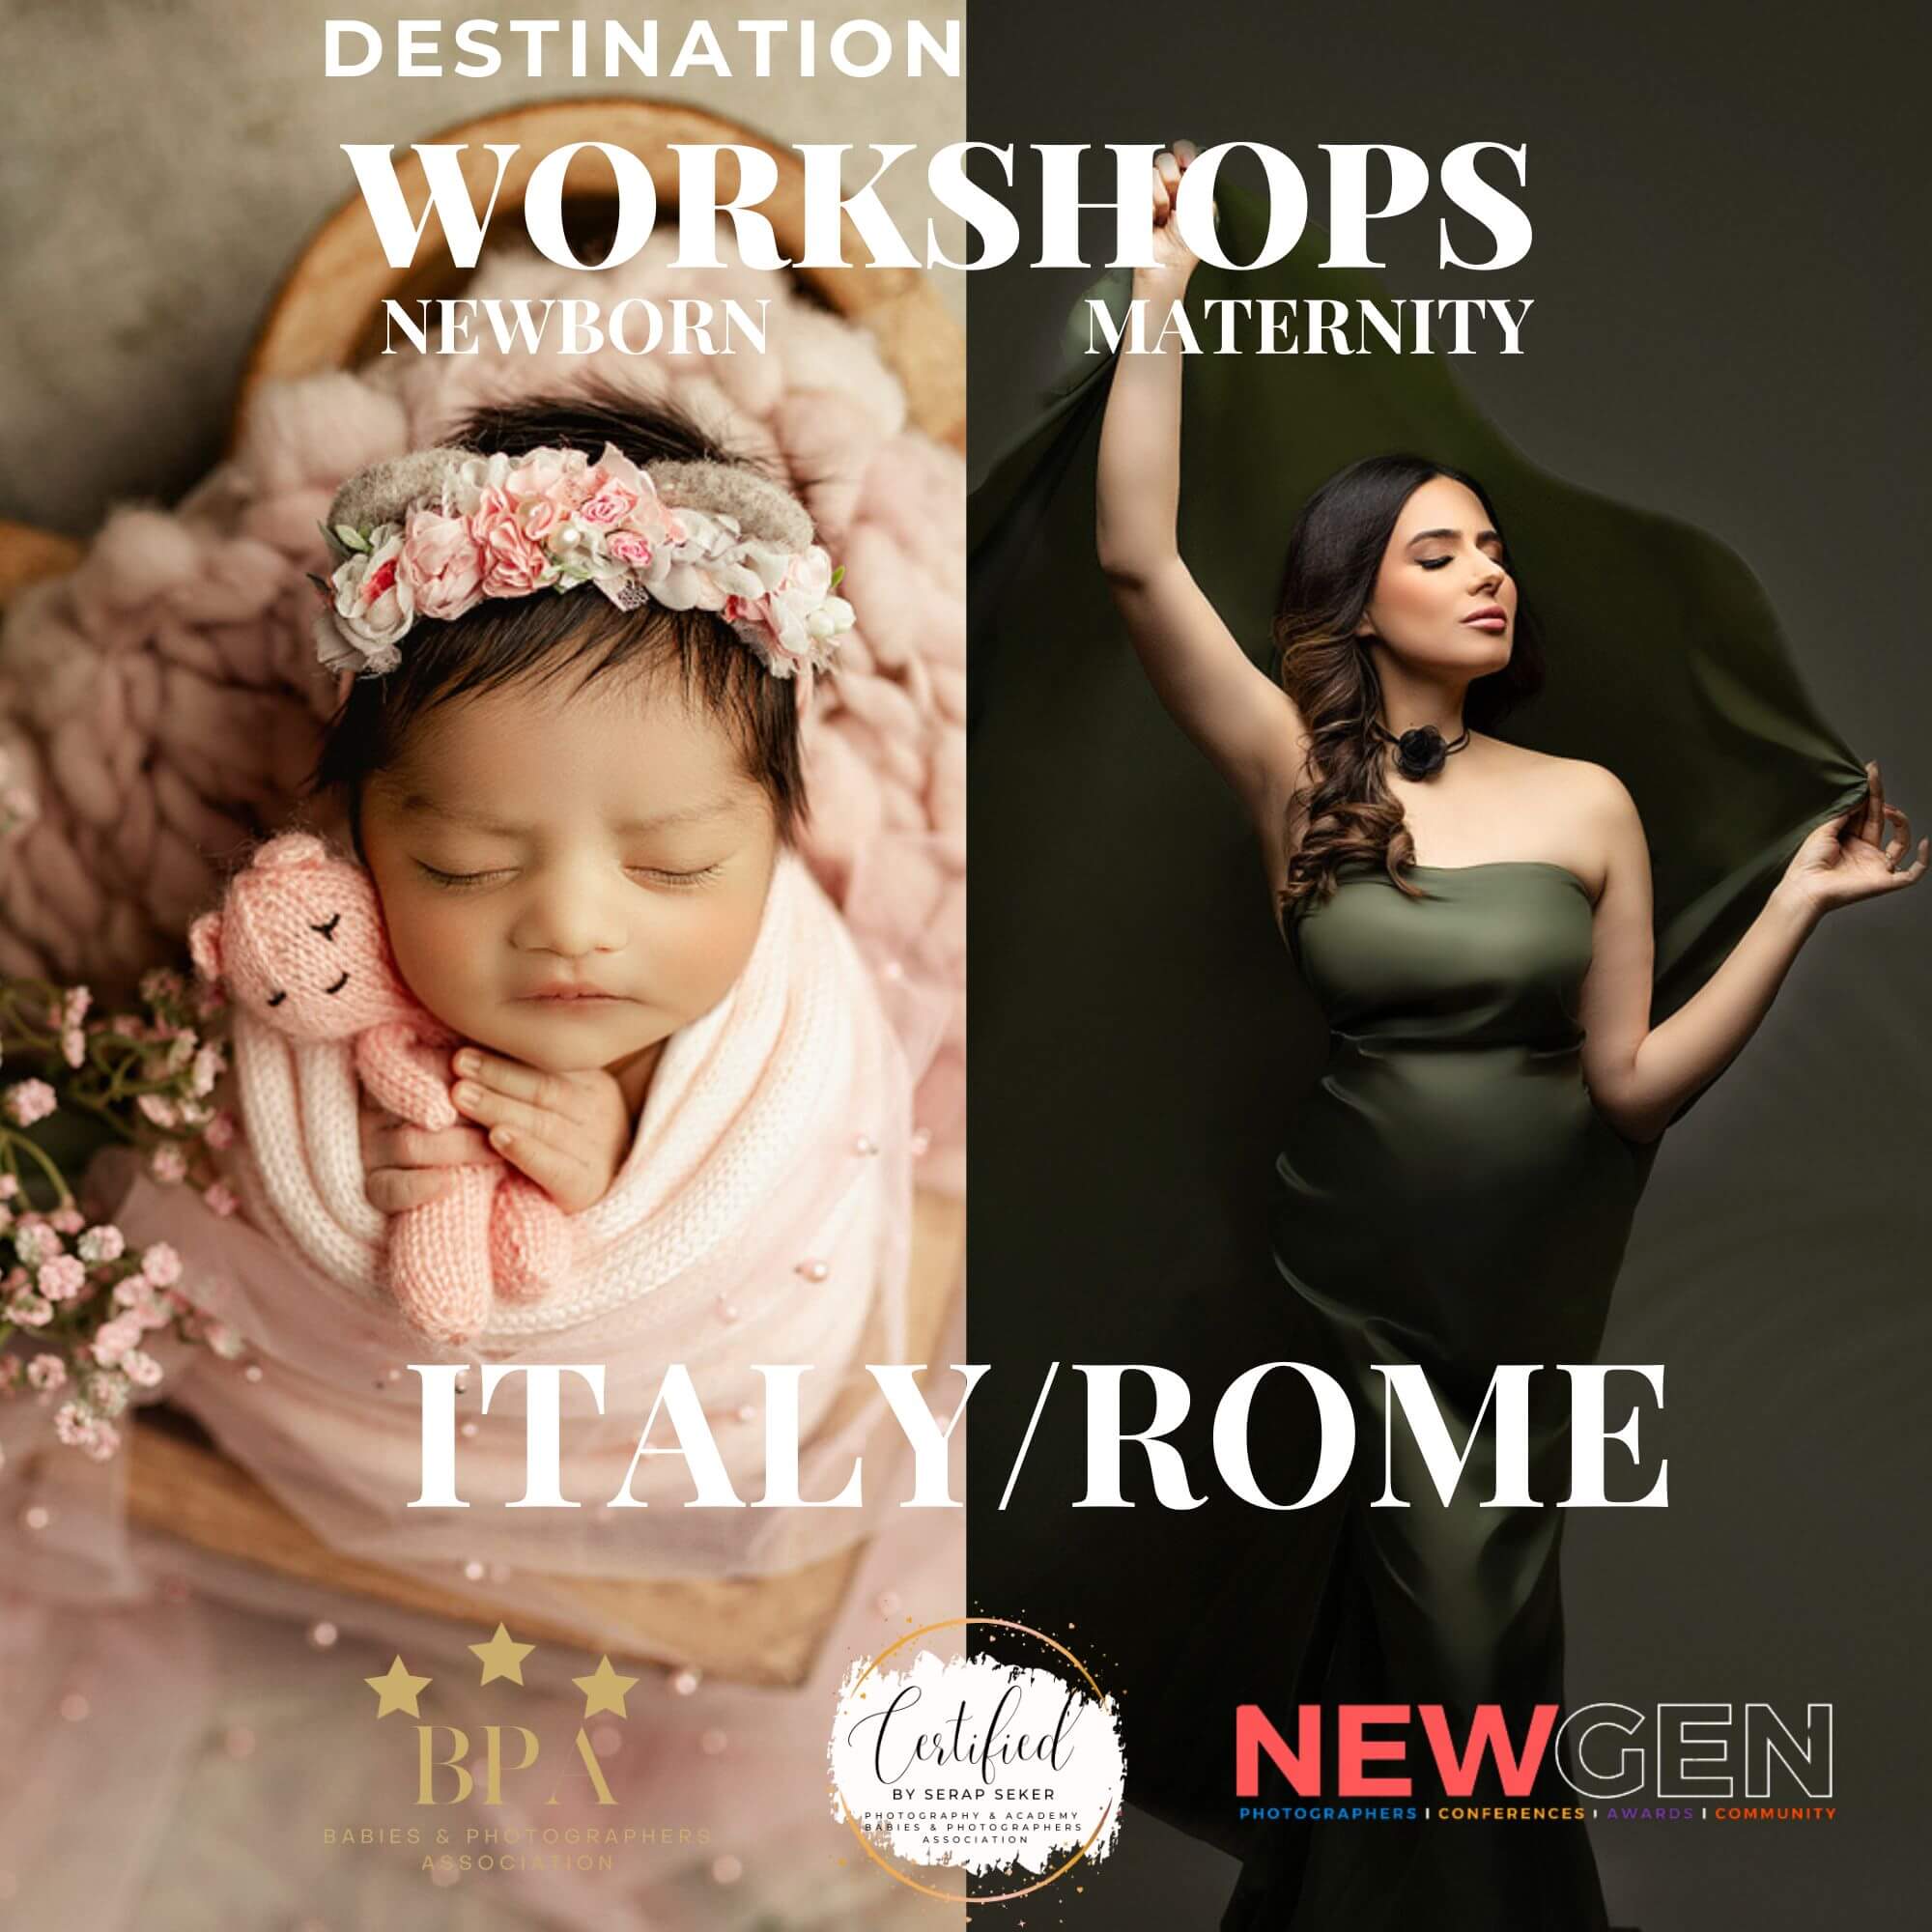 ITALY/ROME WORKSHOP